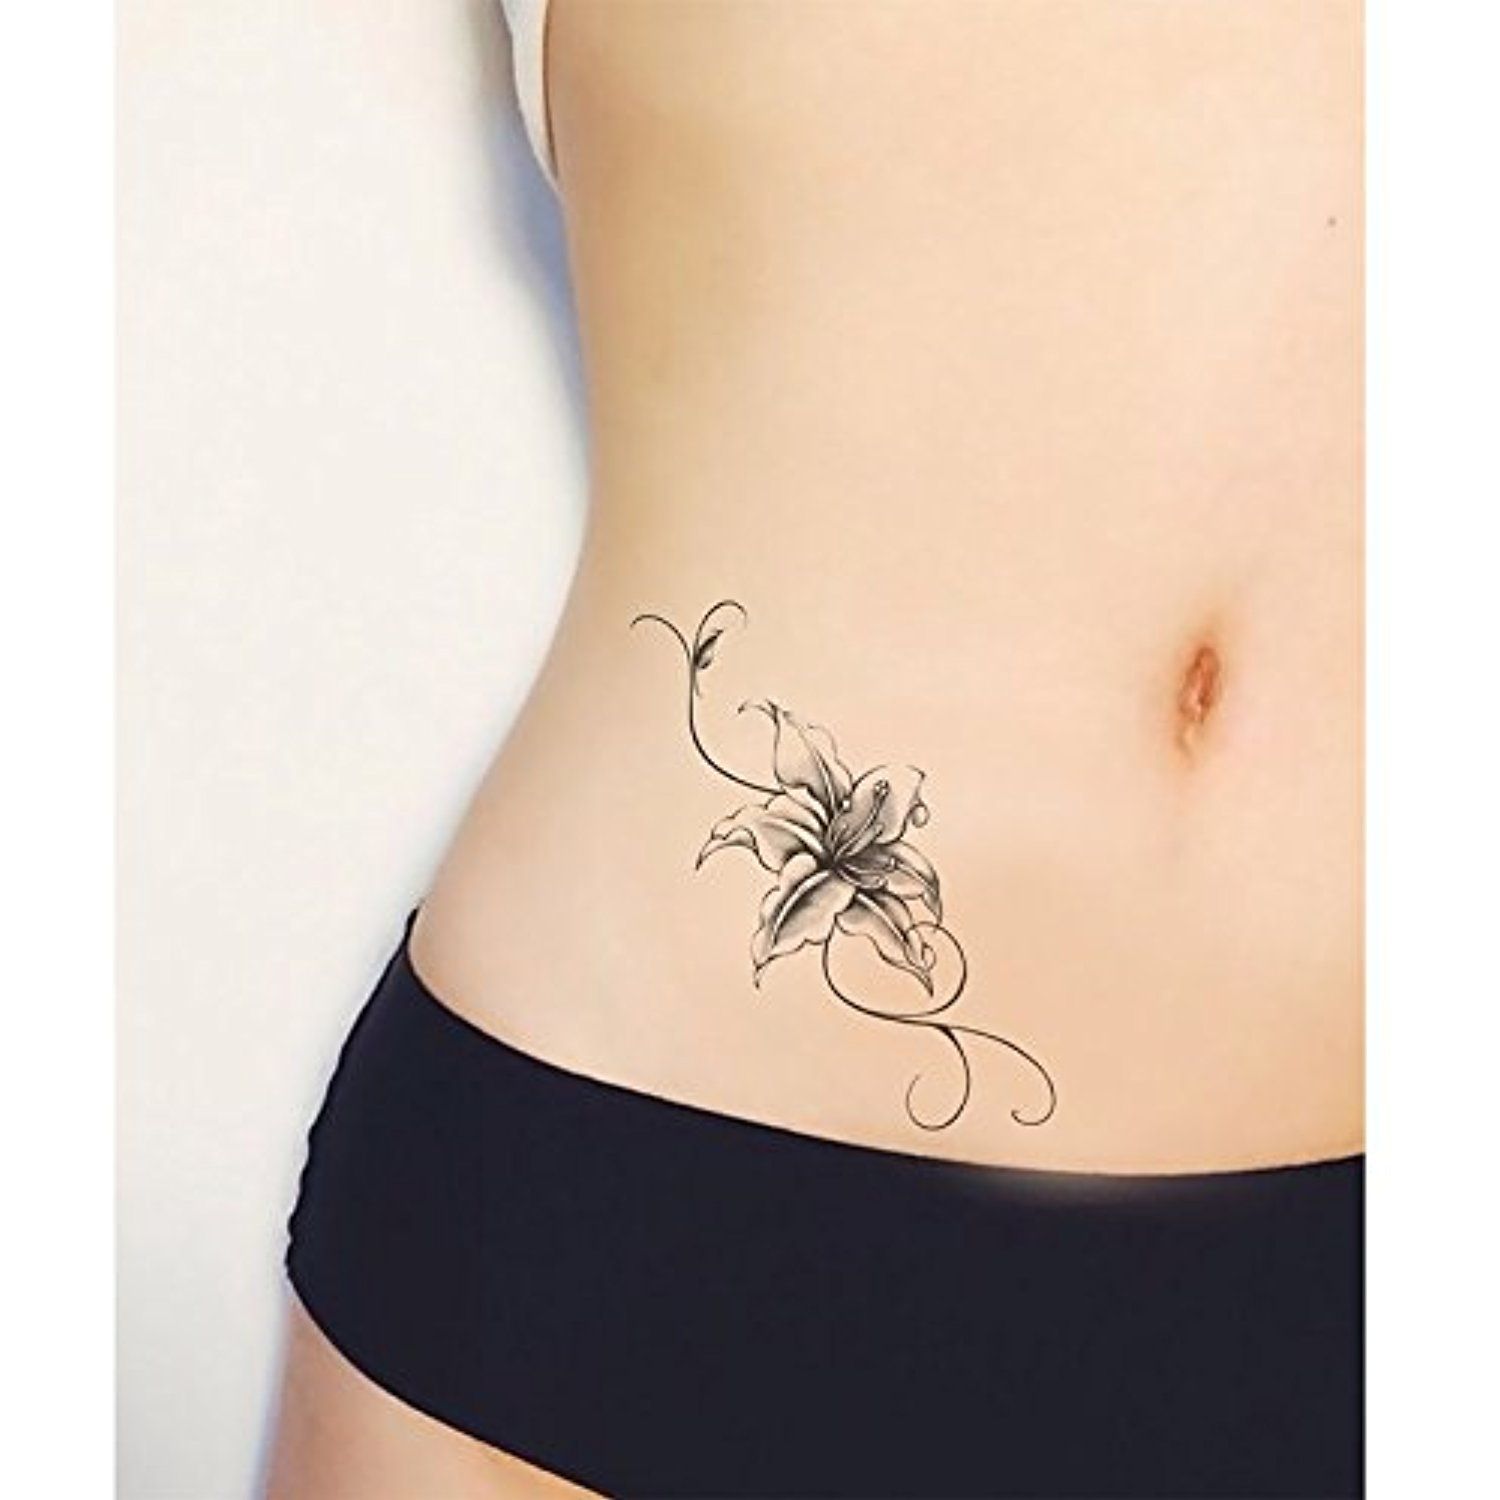 Share more than 73 lower stomach tattoos  thtantai2